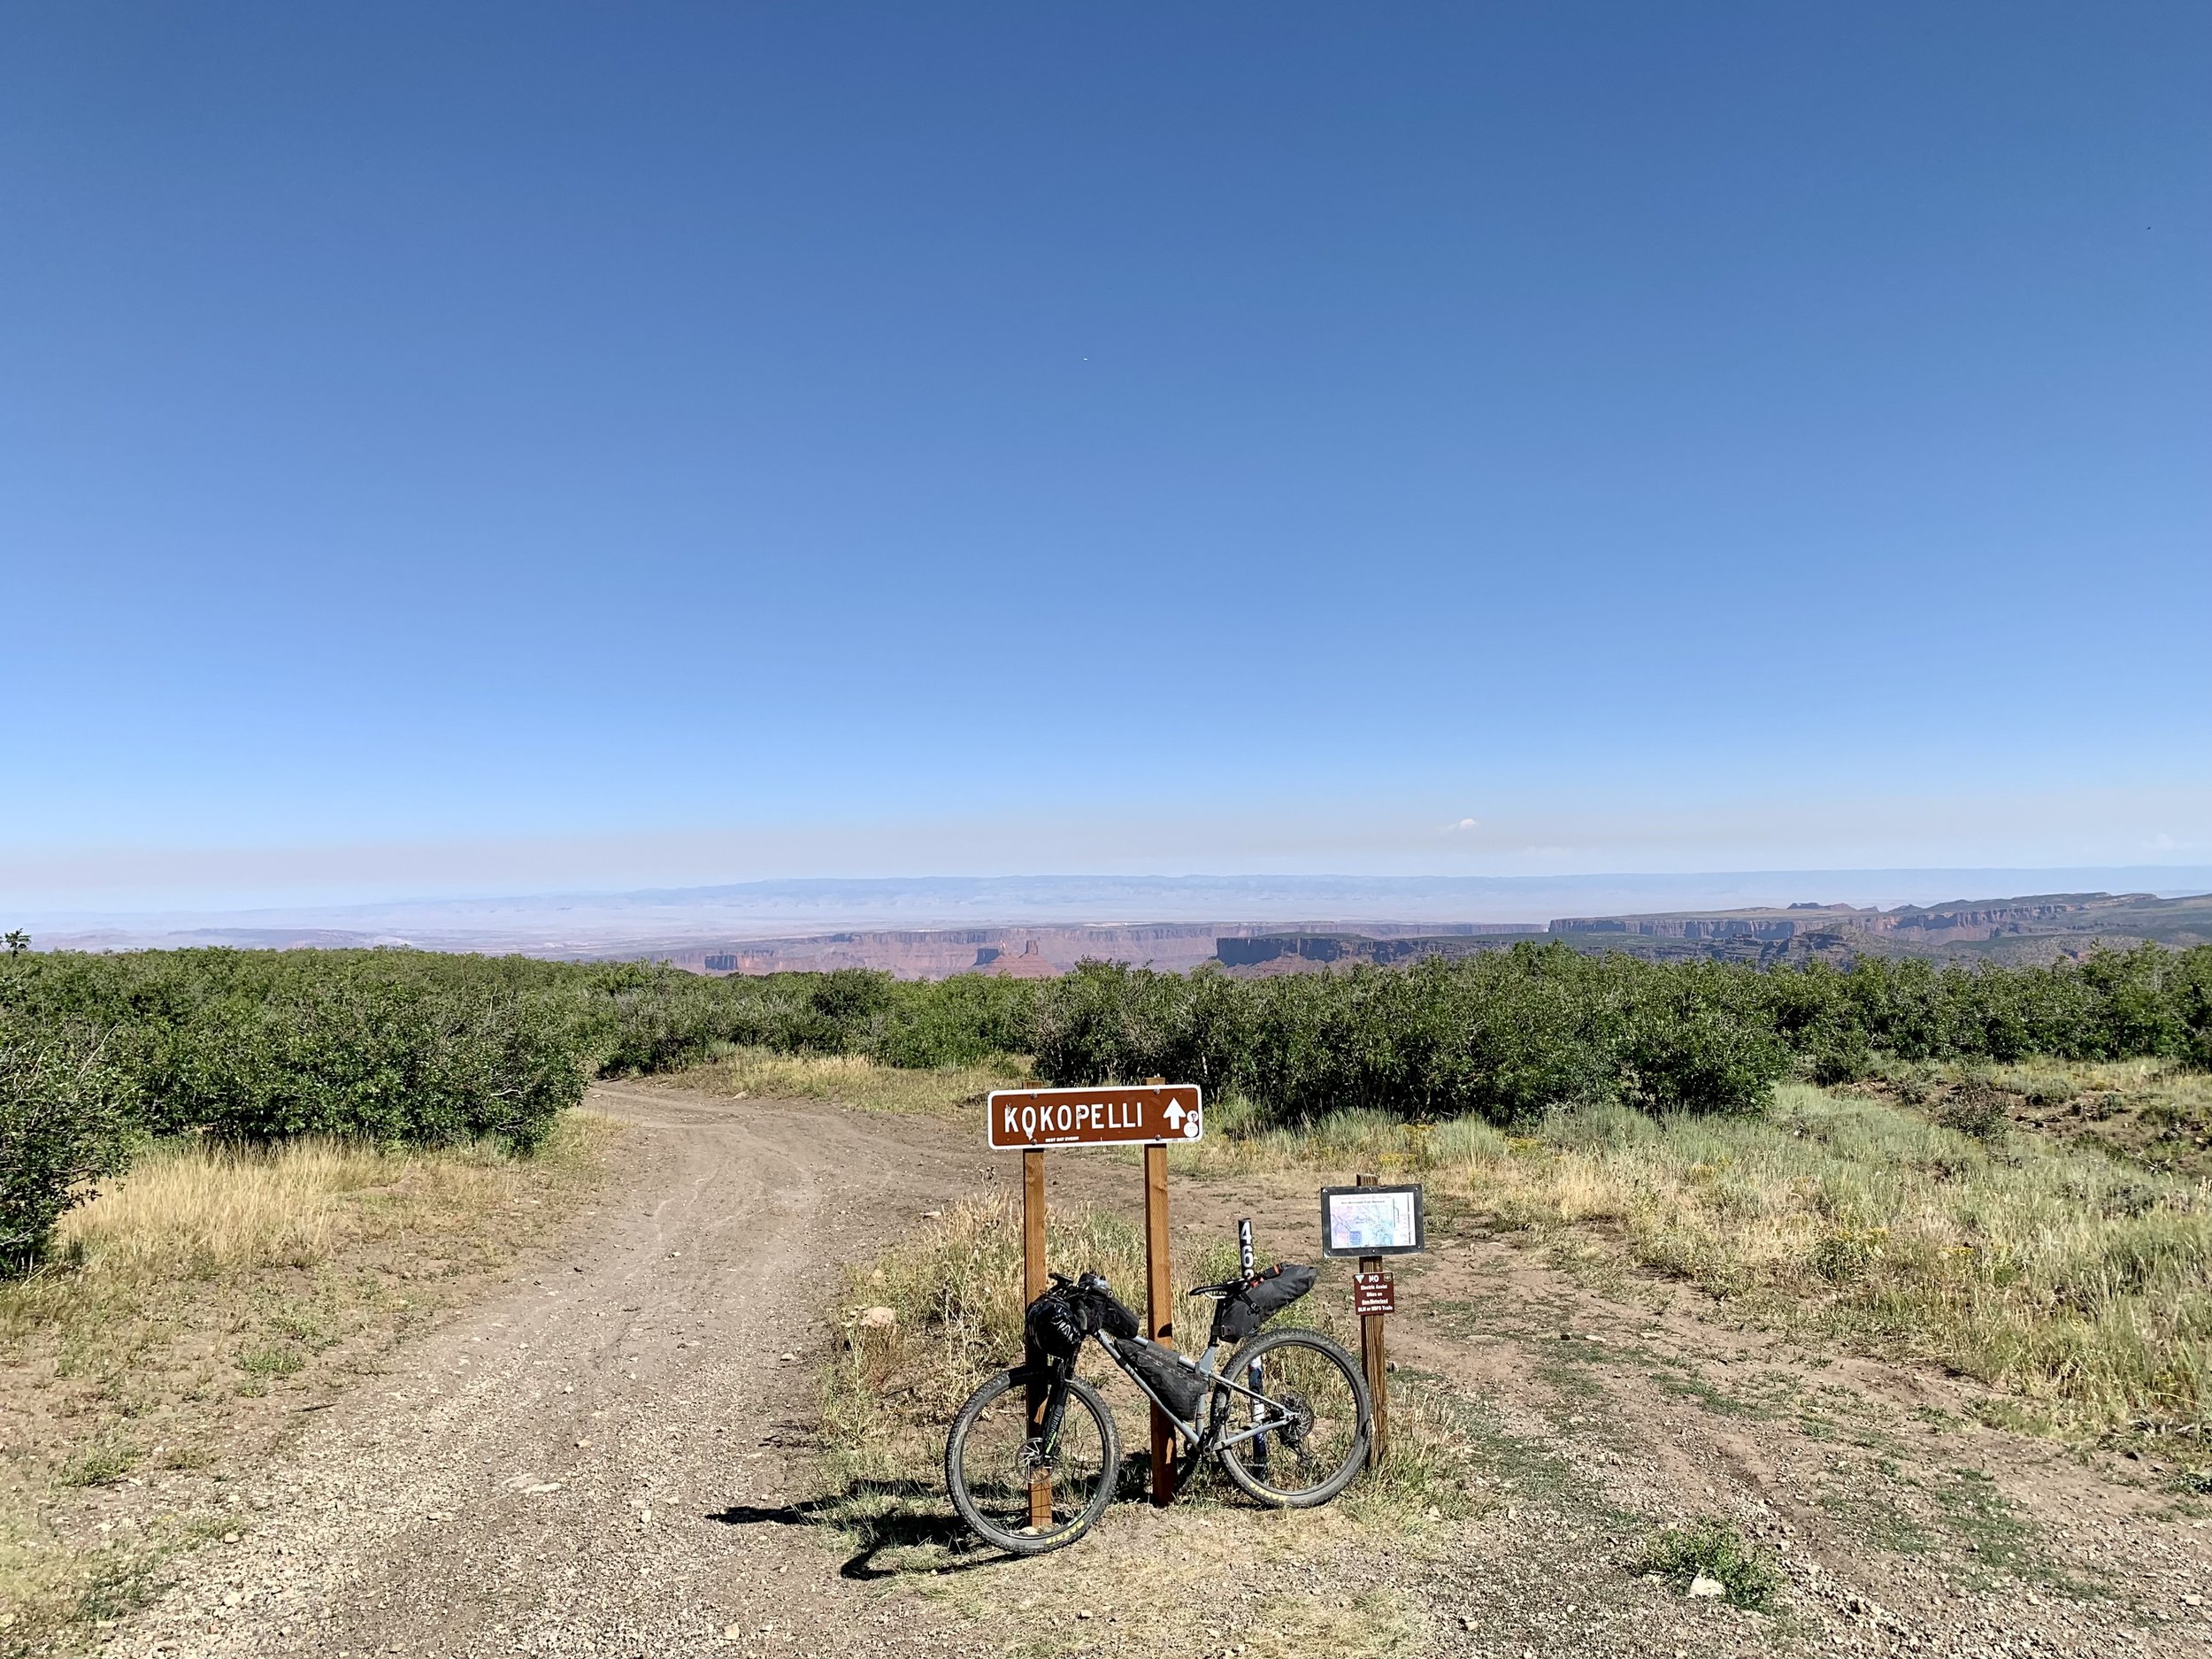 Irena's bike at the Kokopelli trailhead. She was very excited to get this pic because she has another shot of her Fargo in front of the same sign from her Utah Mixed Epic race